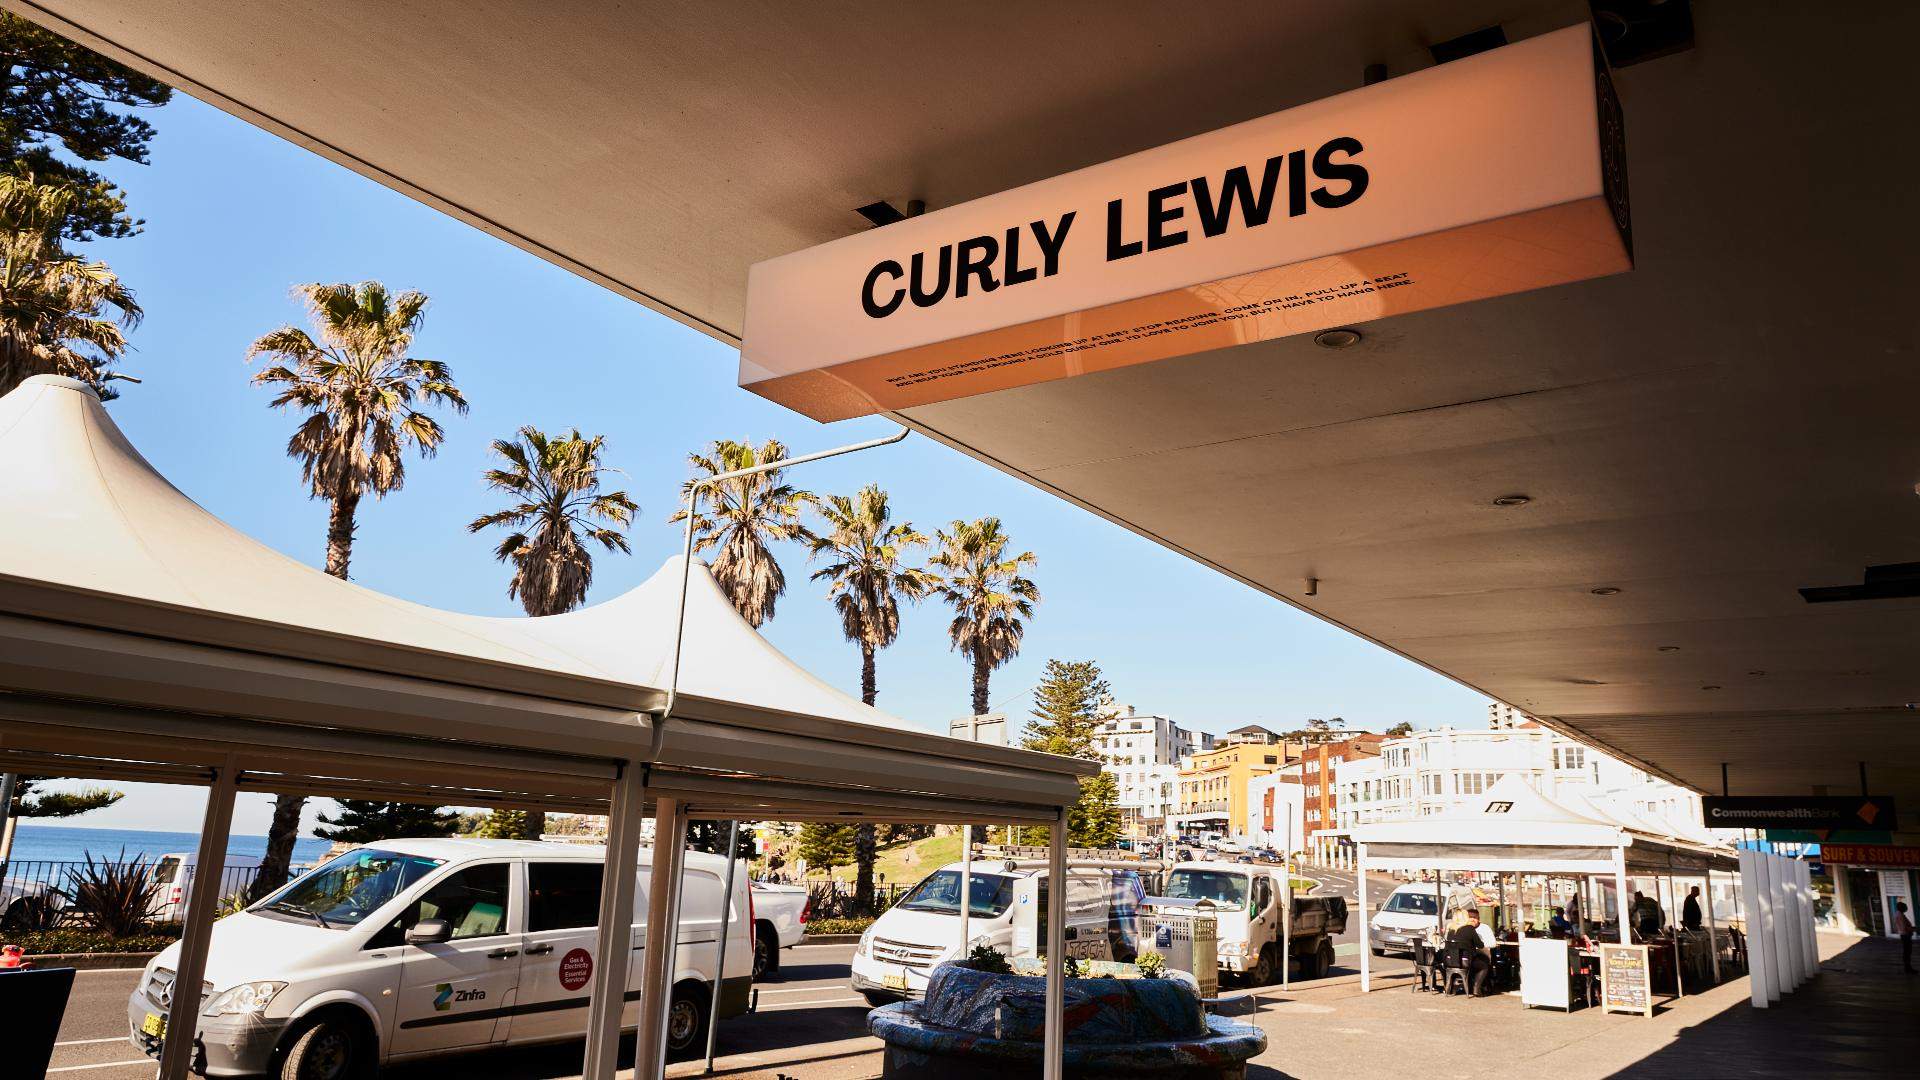 The exterior of Curly Lewis Brewing Co in Bondi, Sydney.